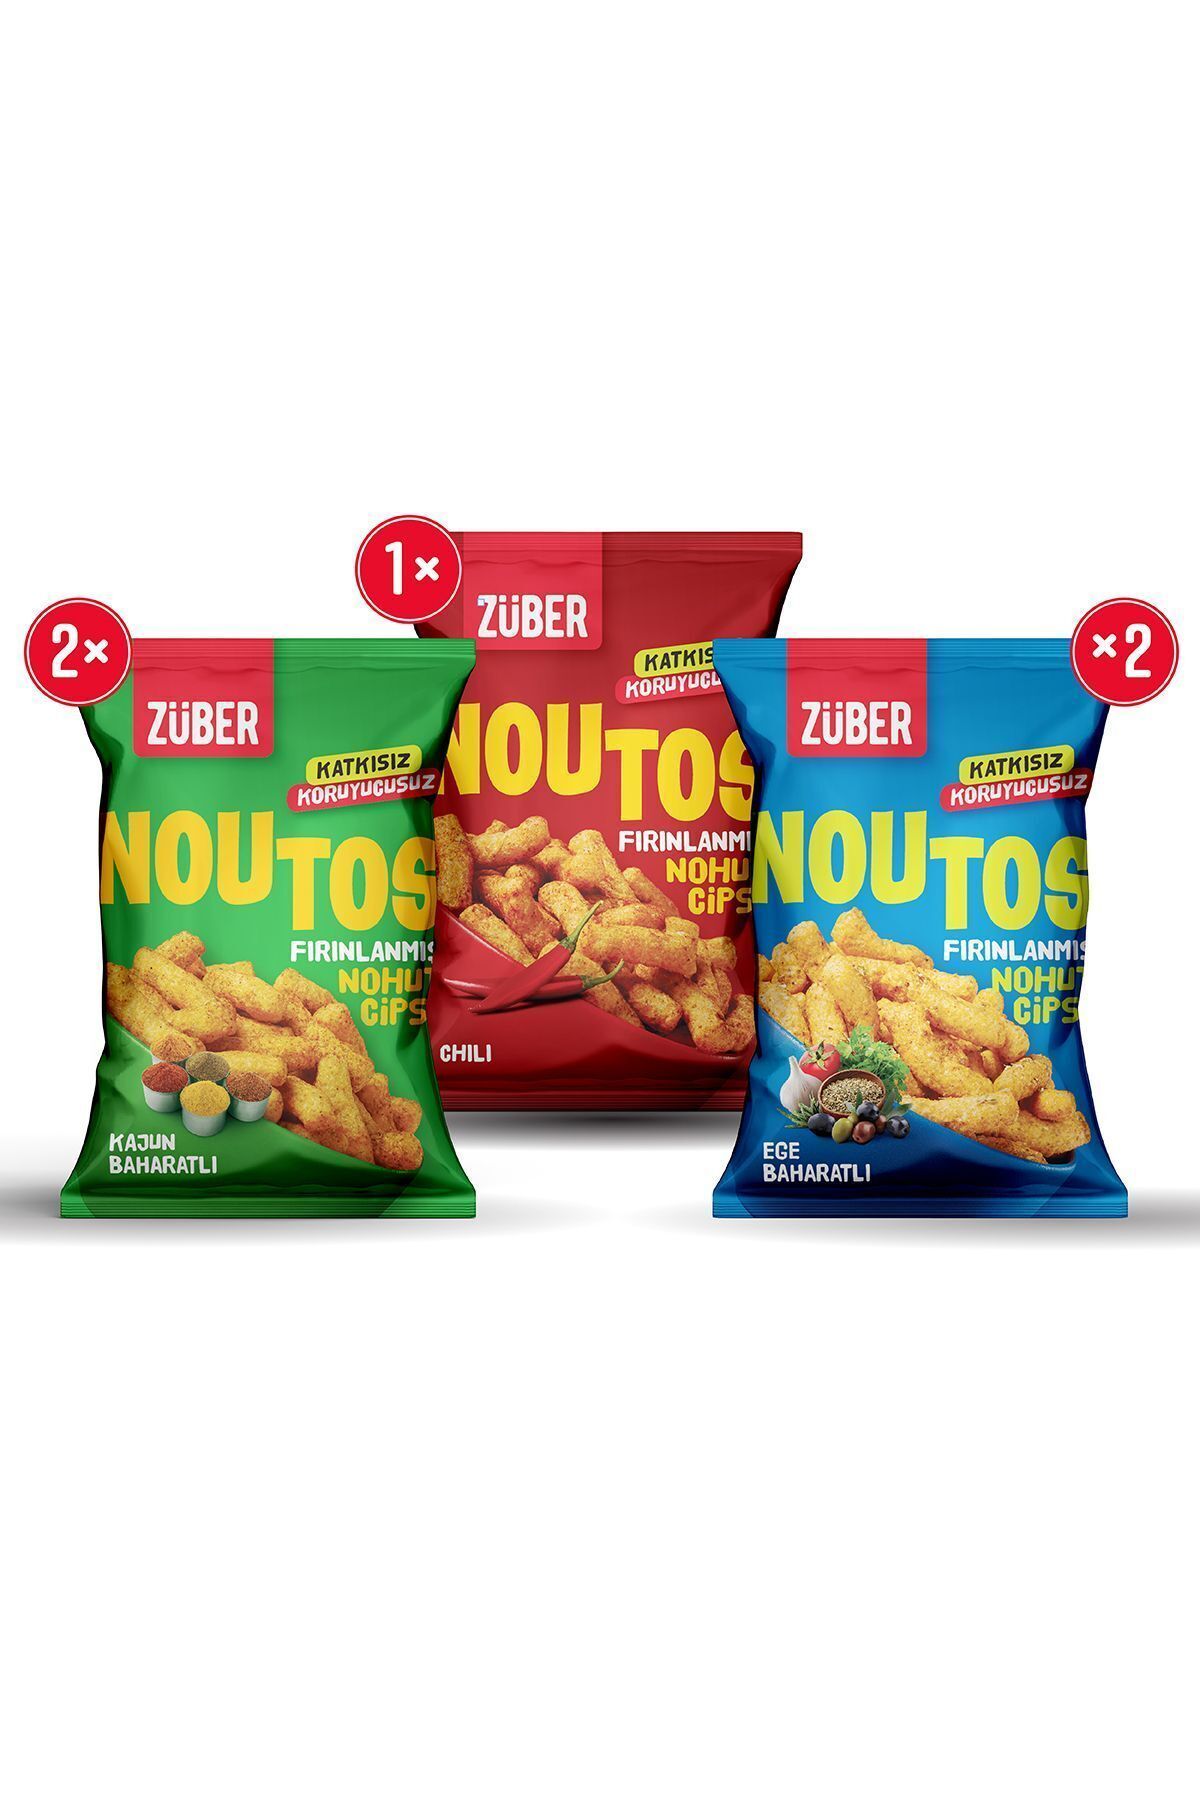 Noutos Chickpea Chips Introduction Pack 55g x 5pcs